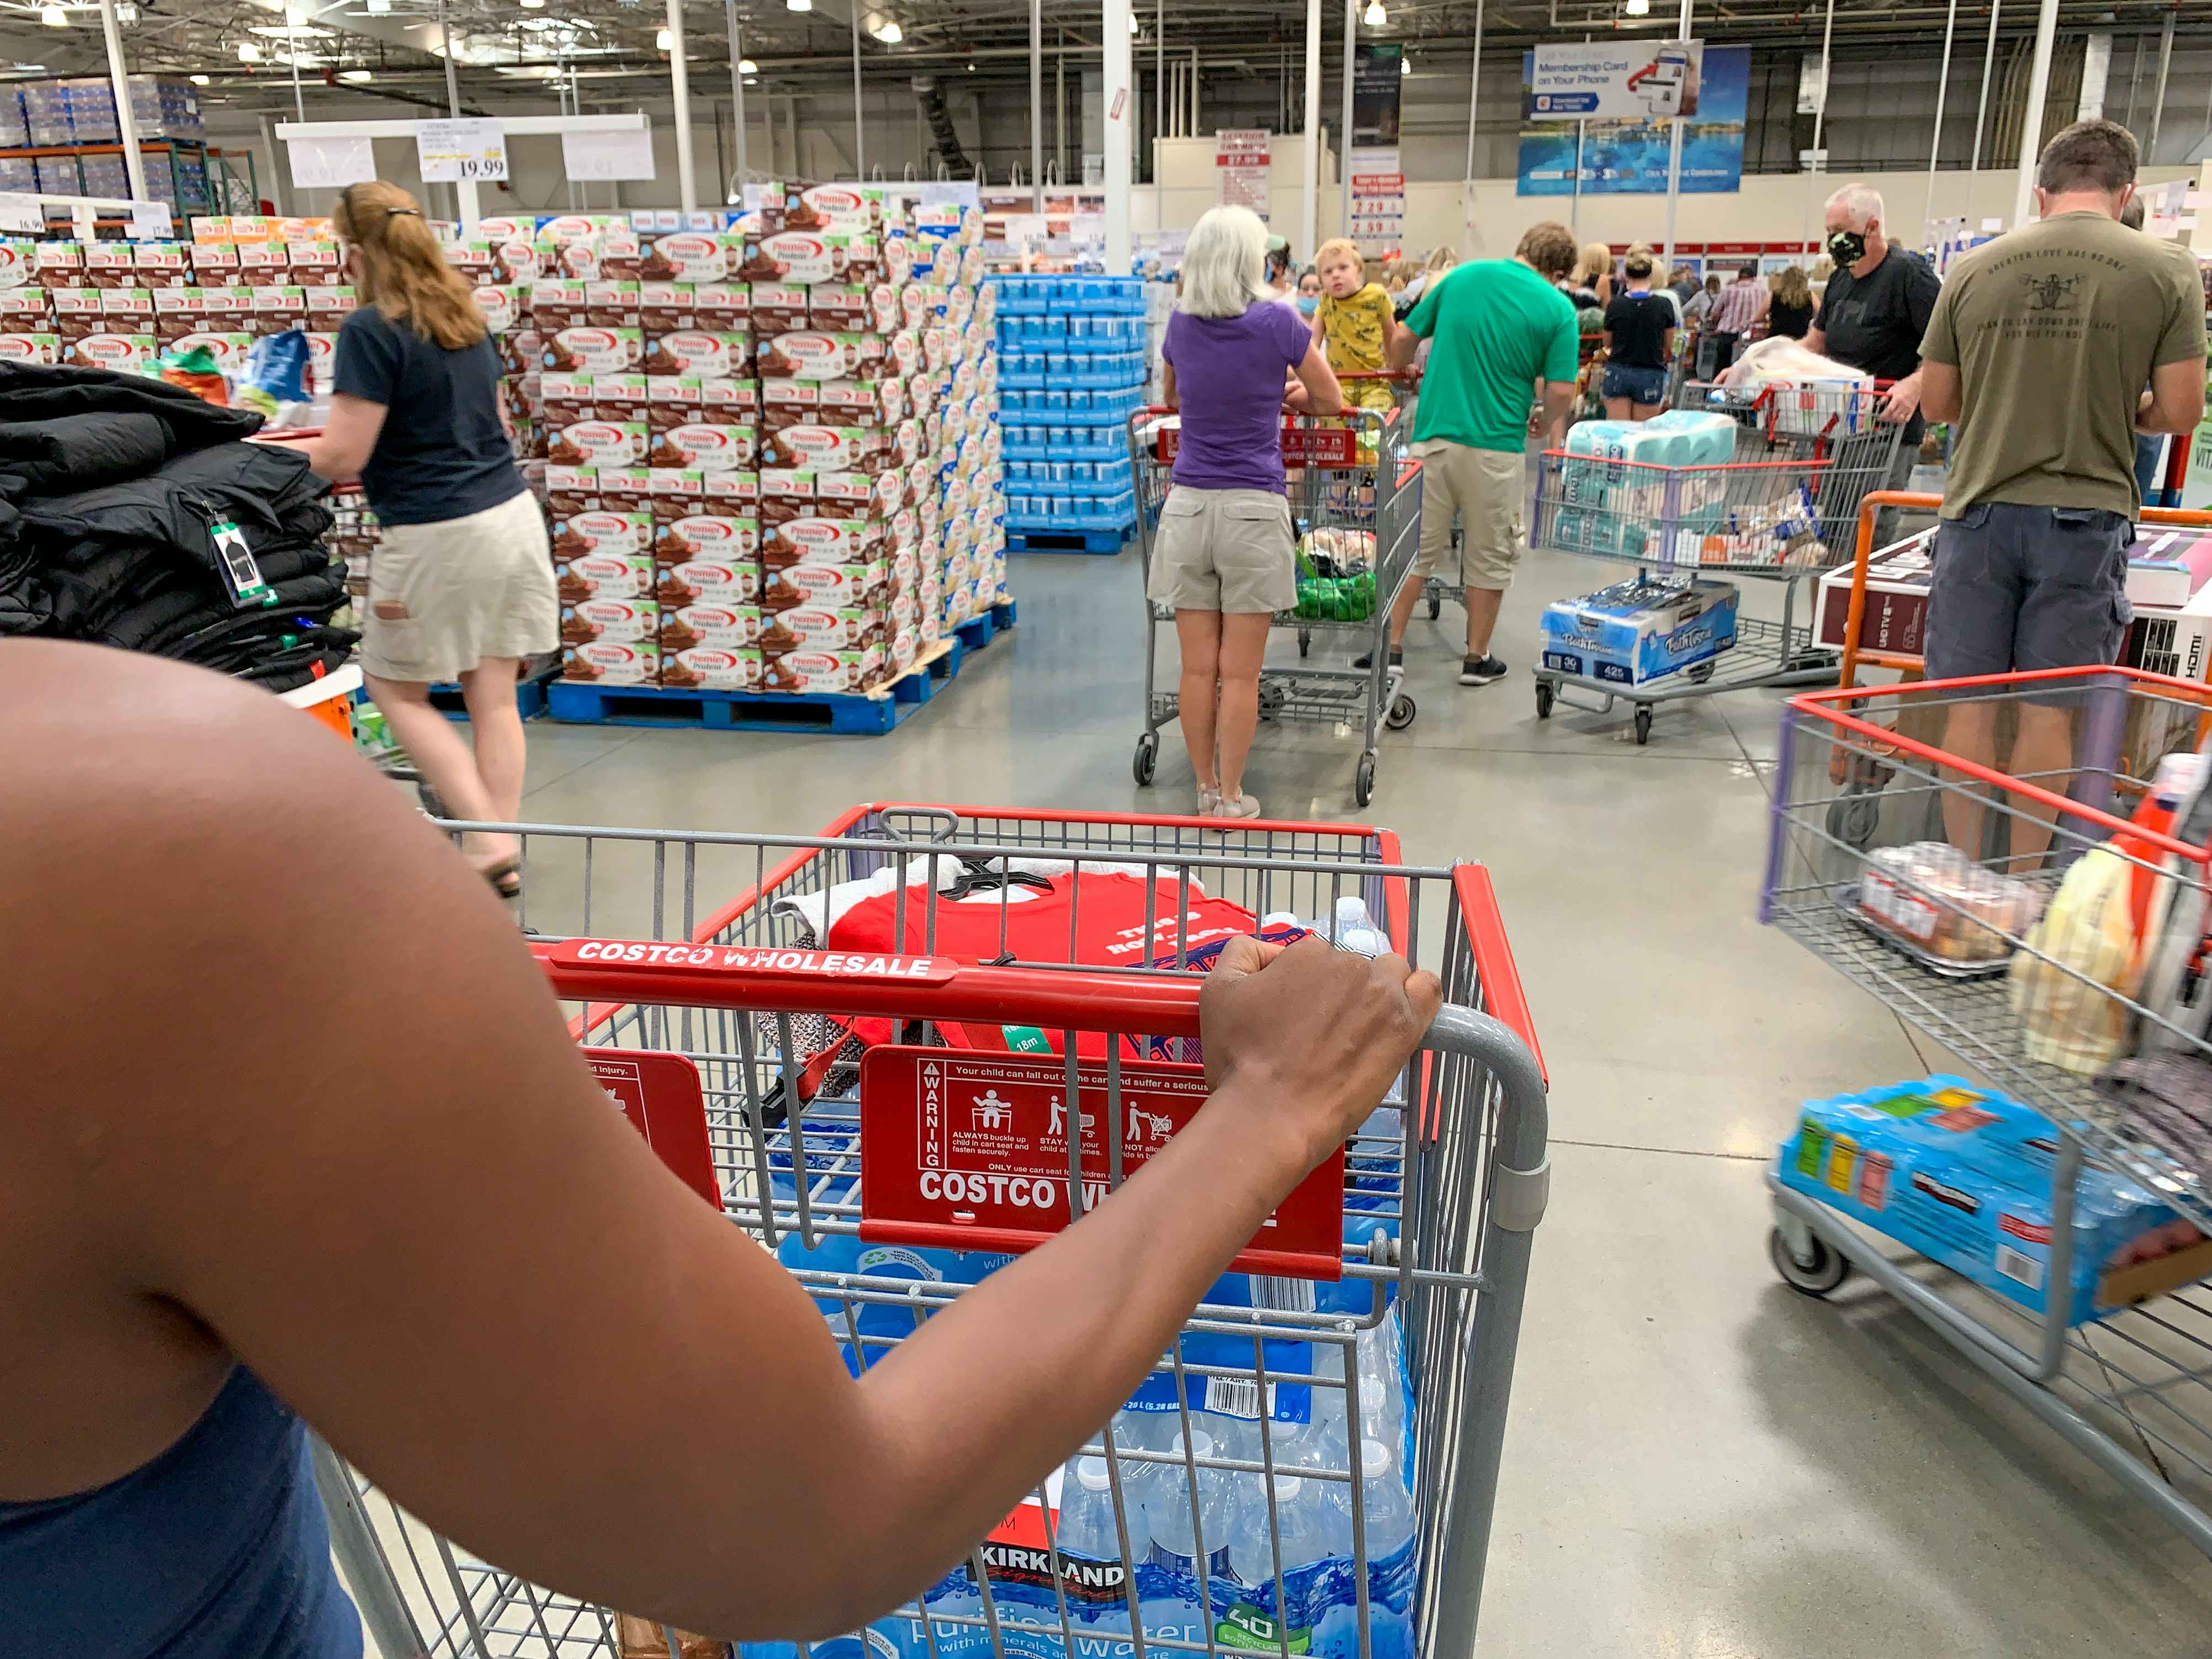 A woman from behind, pushing a Costco shopping cart through a crowd of other shoppers also pushing carts.